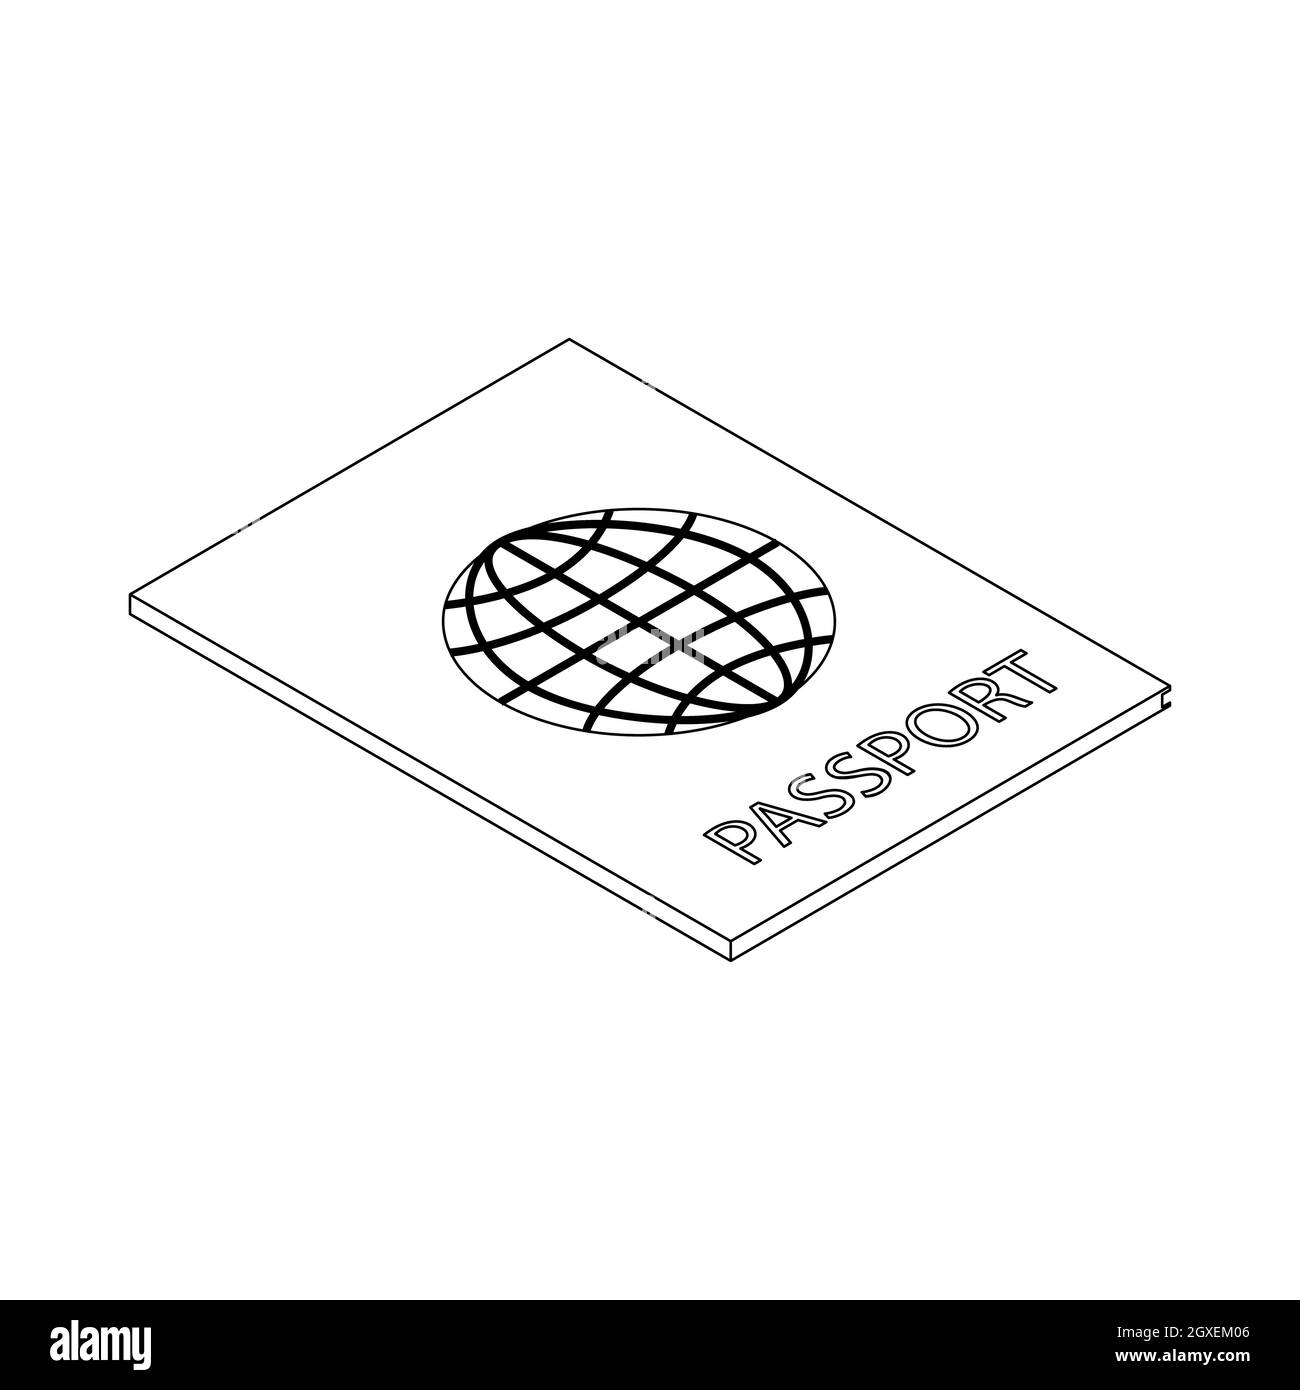 Passport icon in isometric 3d style isolated on white background Stock Photo